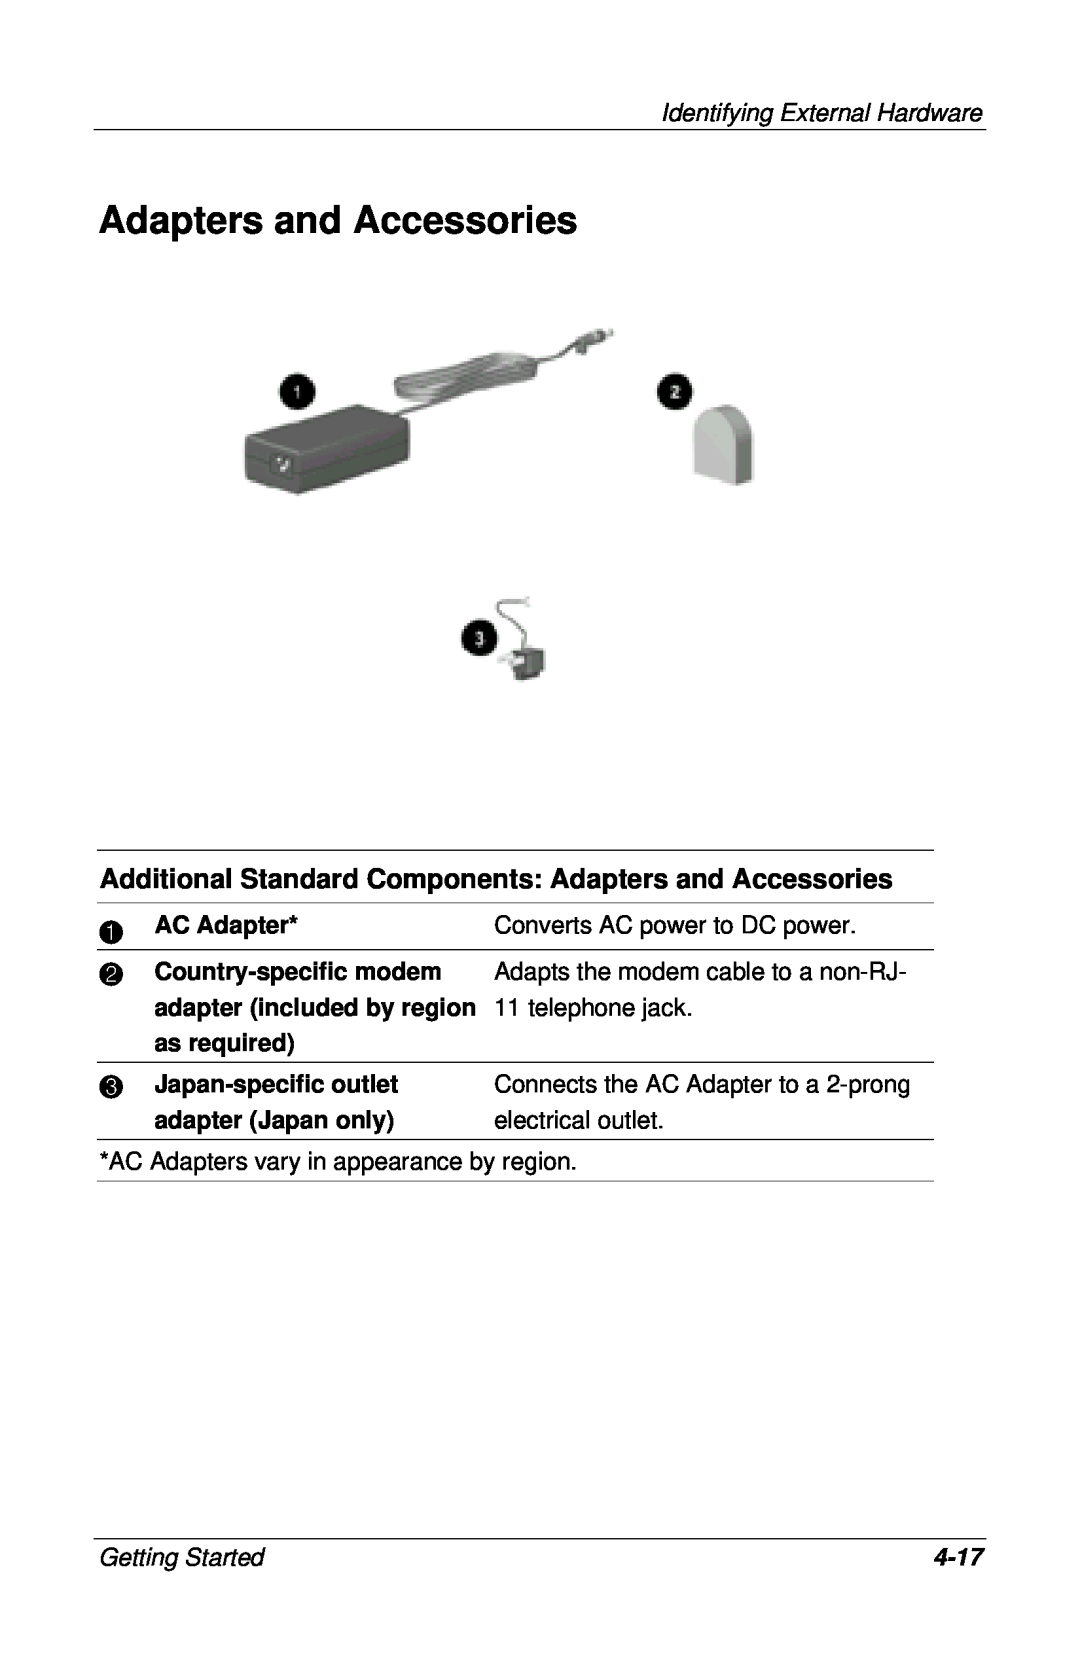 HP 911DE Additional Standard Components Adapters and Accessories, AC Adapter, Converts AC power to DC power, 4-17 